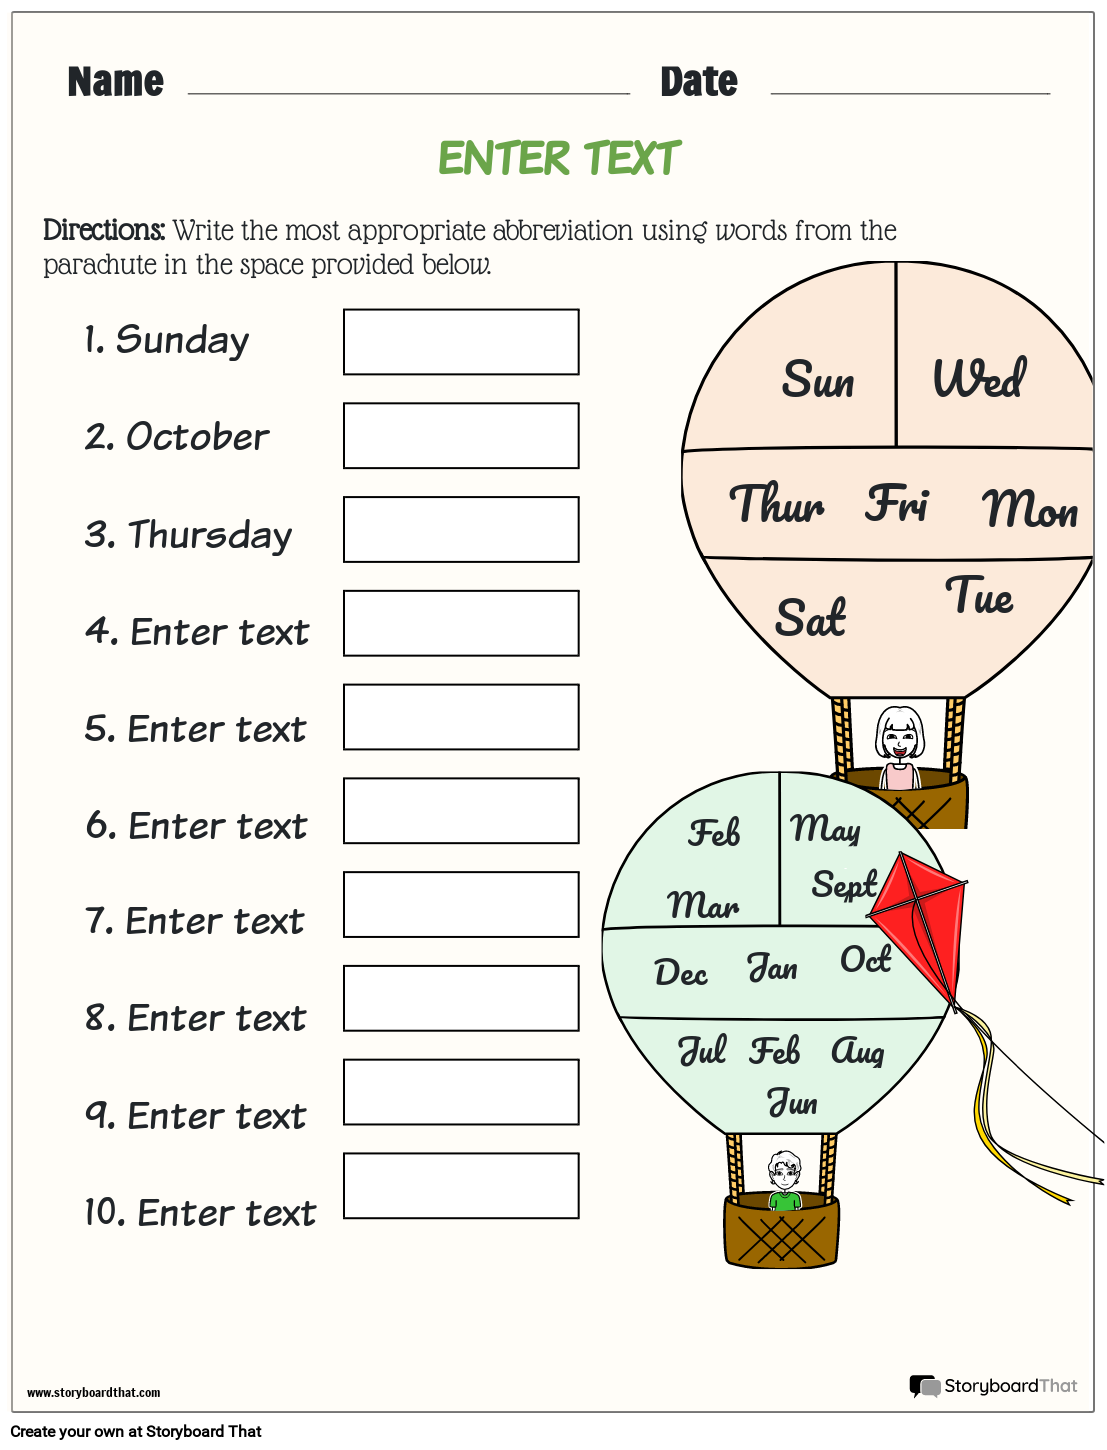 Abbreviations for Days and Months Worksheet